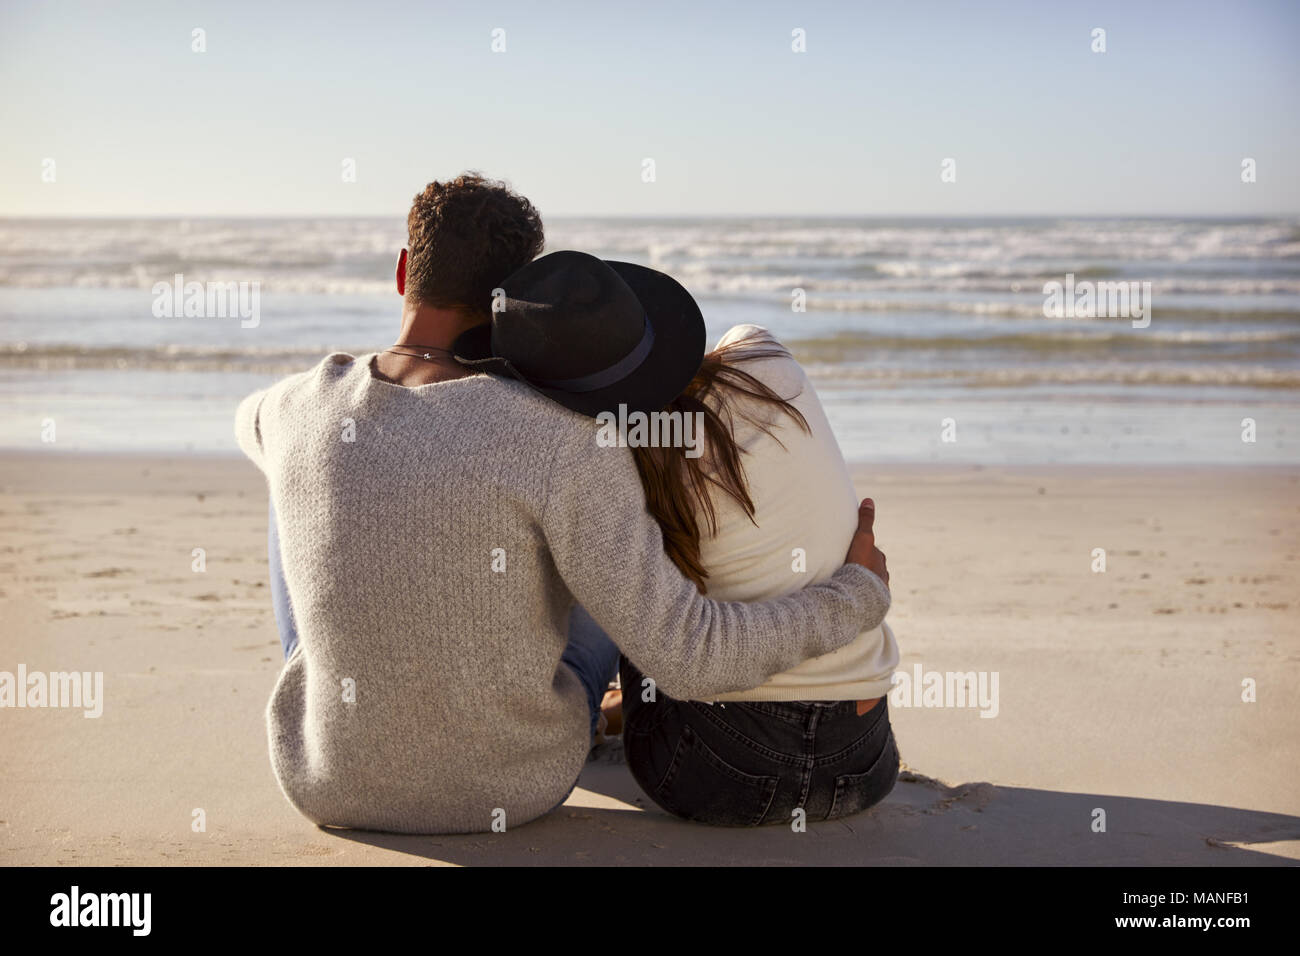 Romantic Couple Sitting On Winter Beach Together Stock Photo